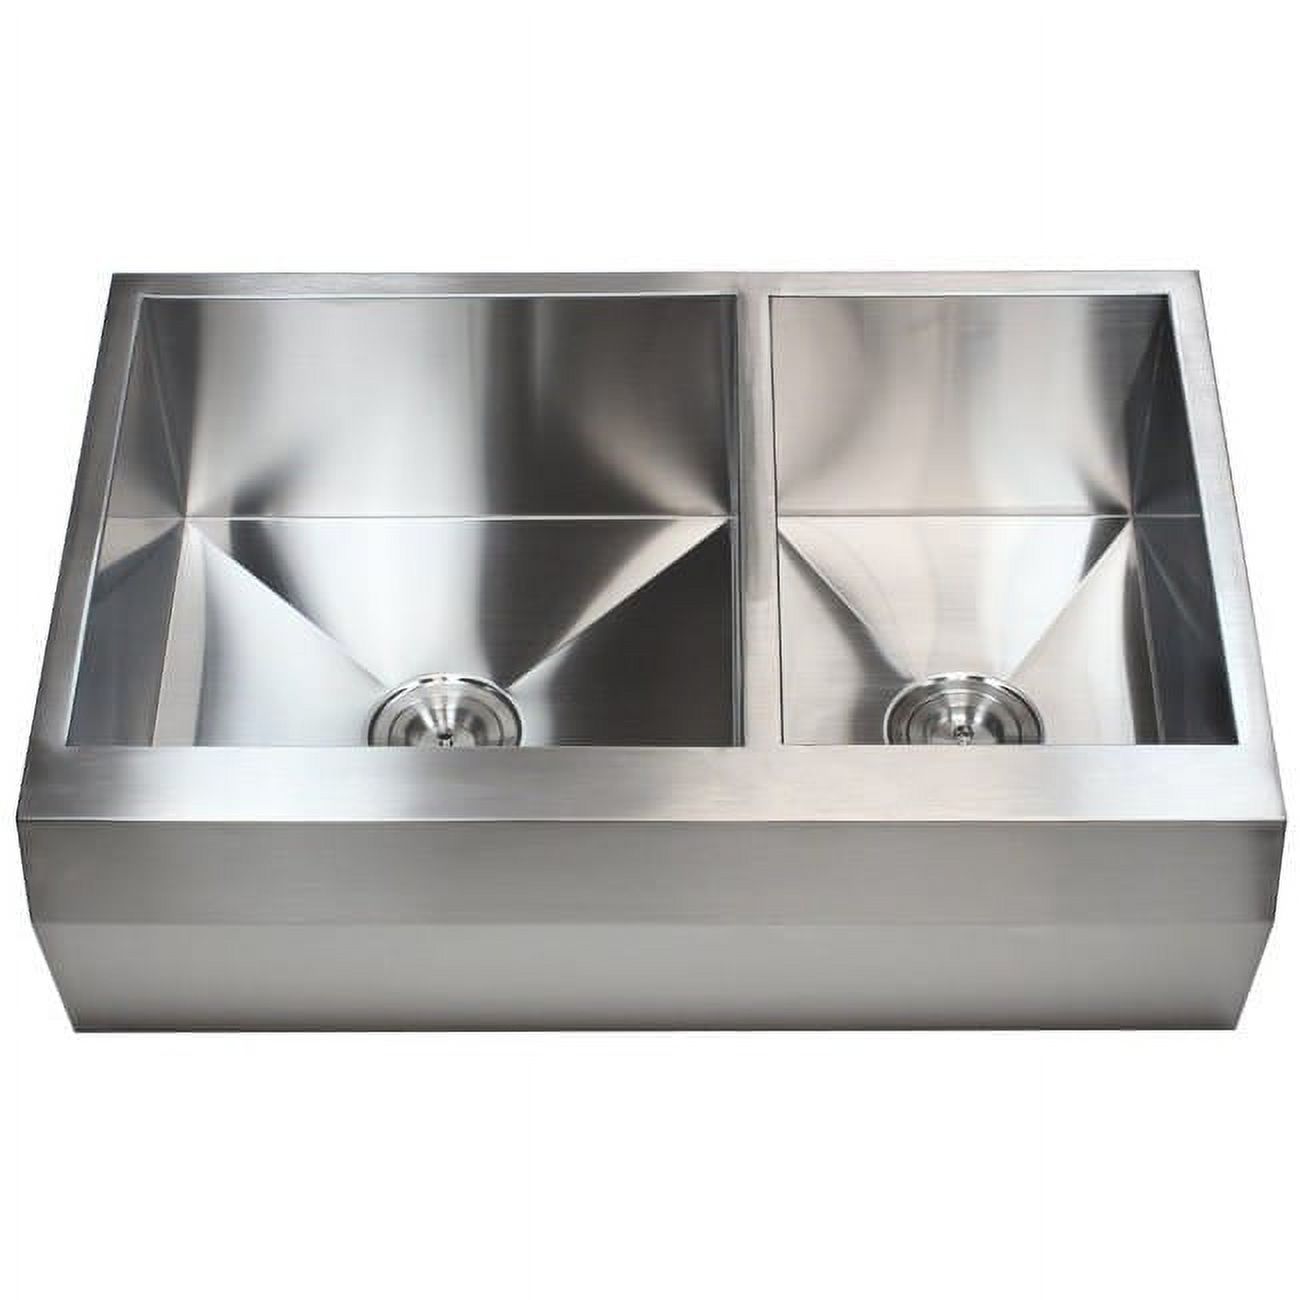 Contempo Living  33 in. Double Bowl 60 by 40 Zero Radius Well Angled Farm Apron Kitchen Sink - Stainless Steel - 16 Gauge - image 2 of 5